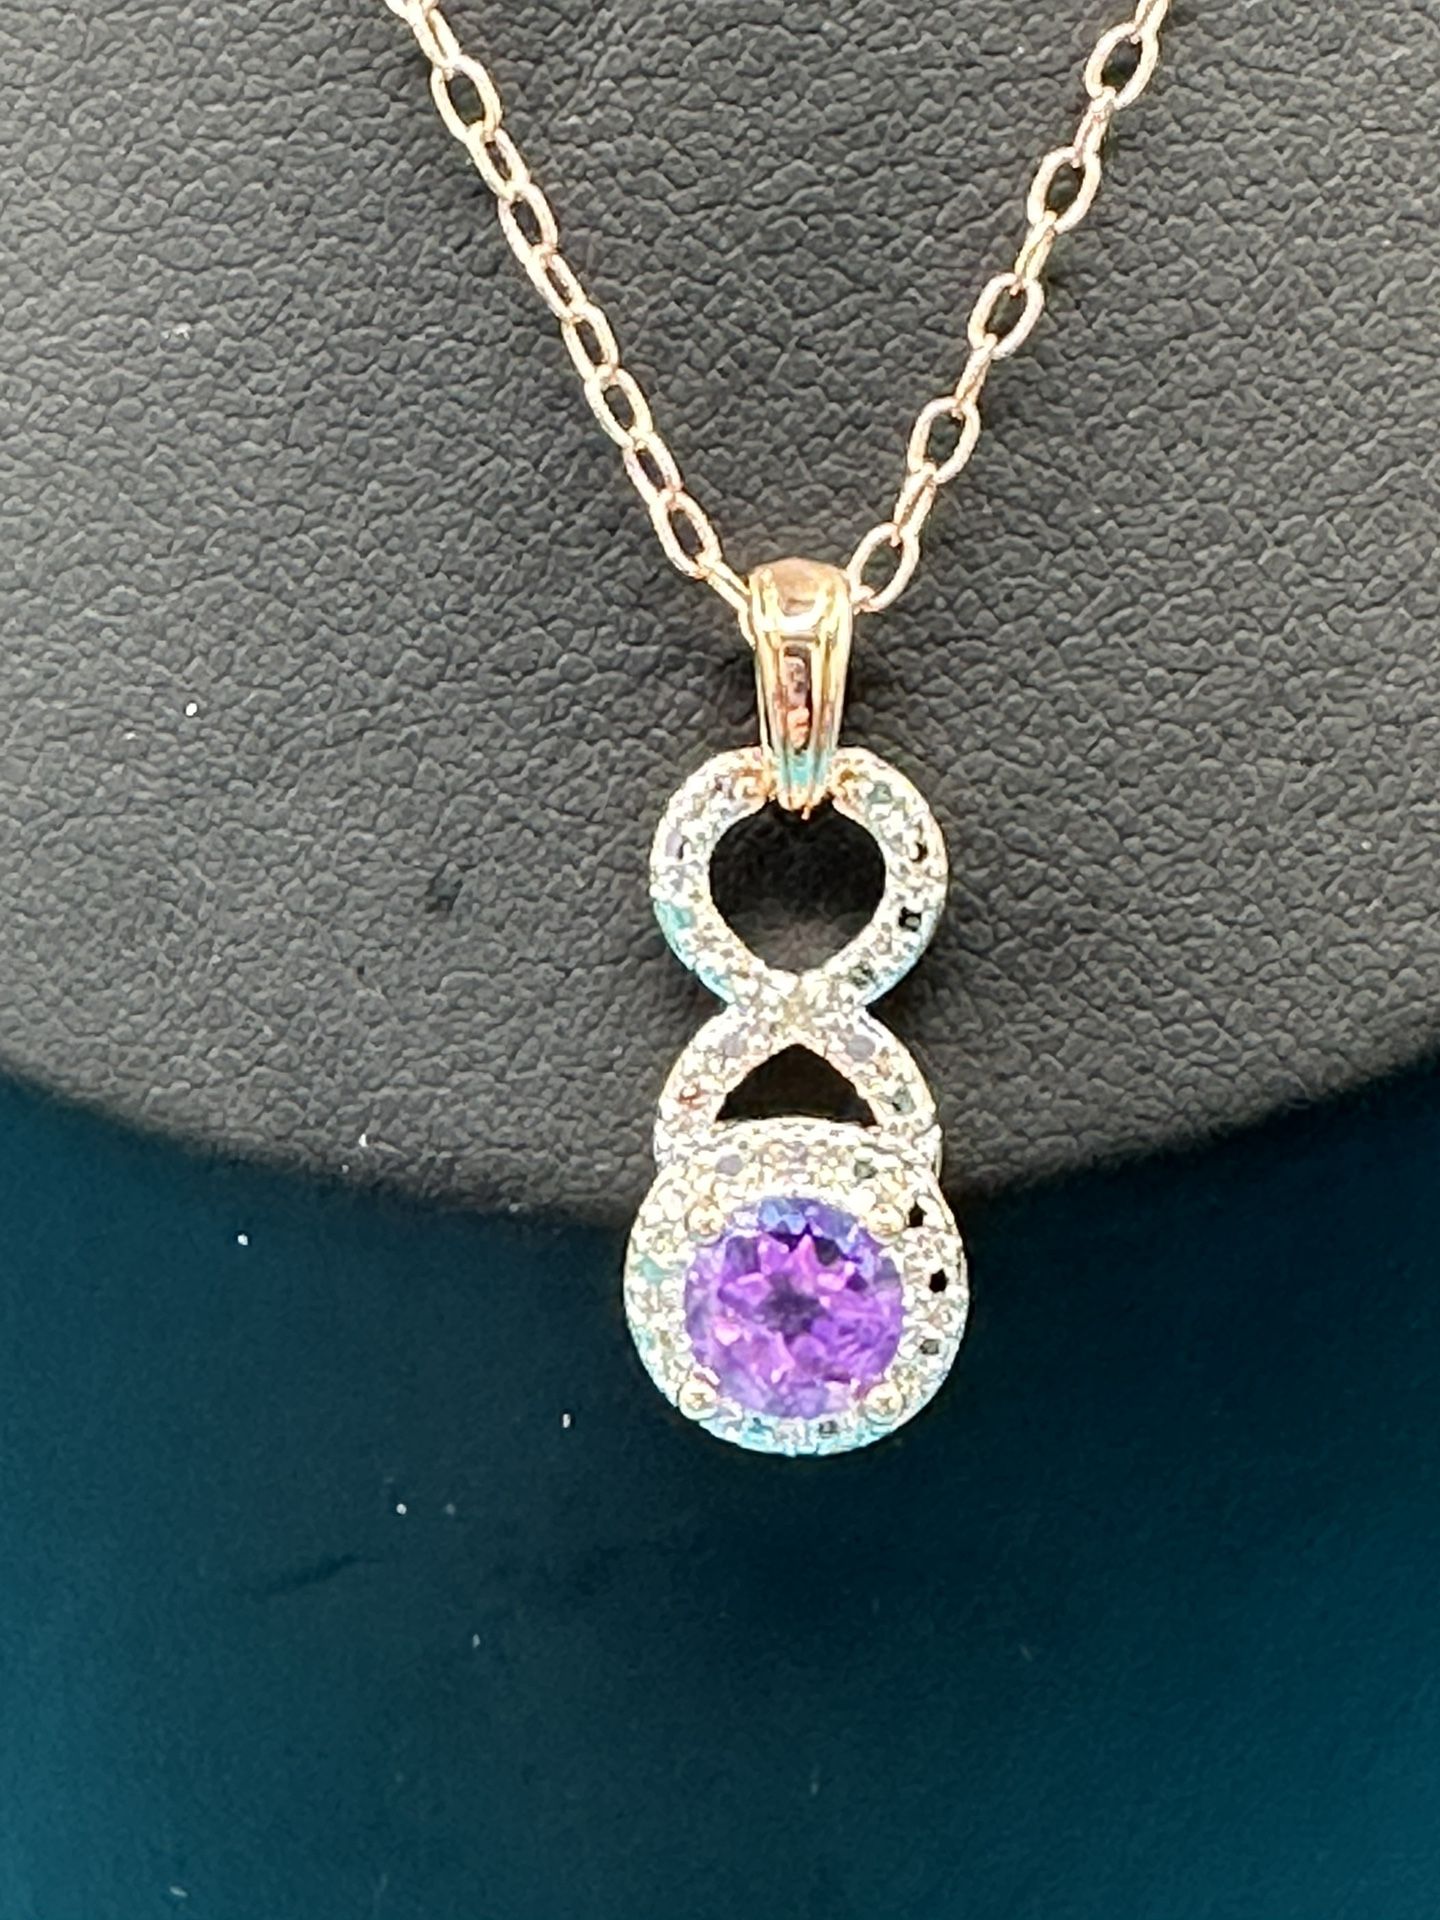 New Natural Genuine African Amethyst & Diamond Accents 18” Long Pendant Measures 1” Shiny Chain & Mounting Are Copper